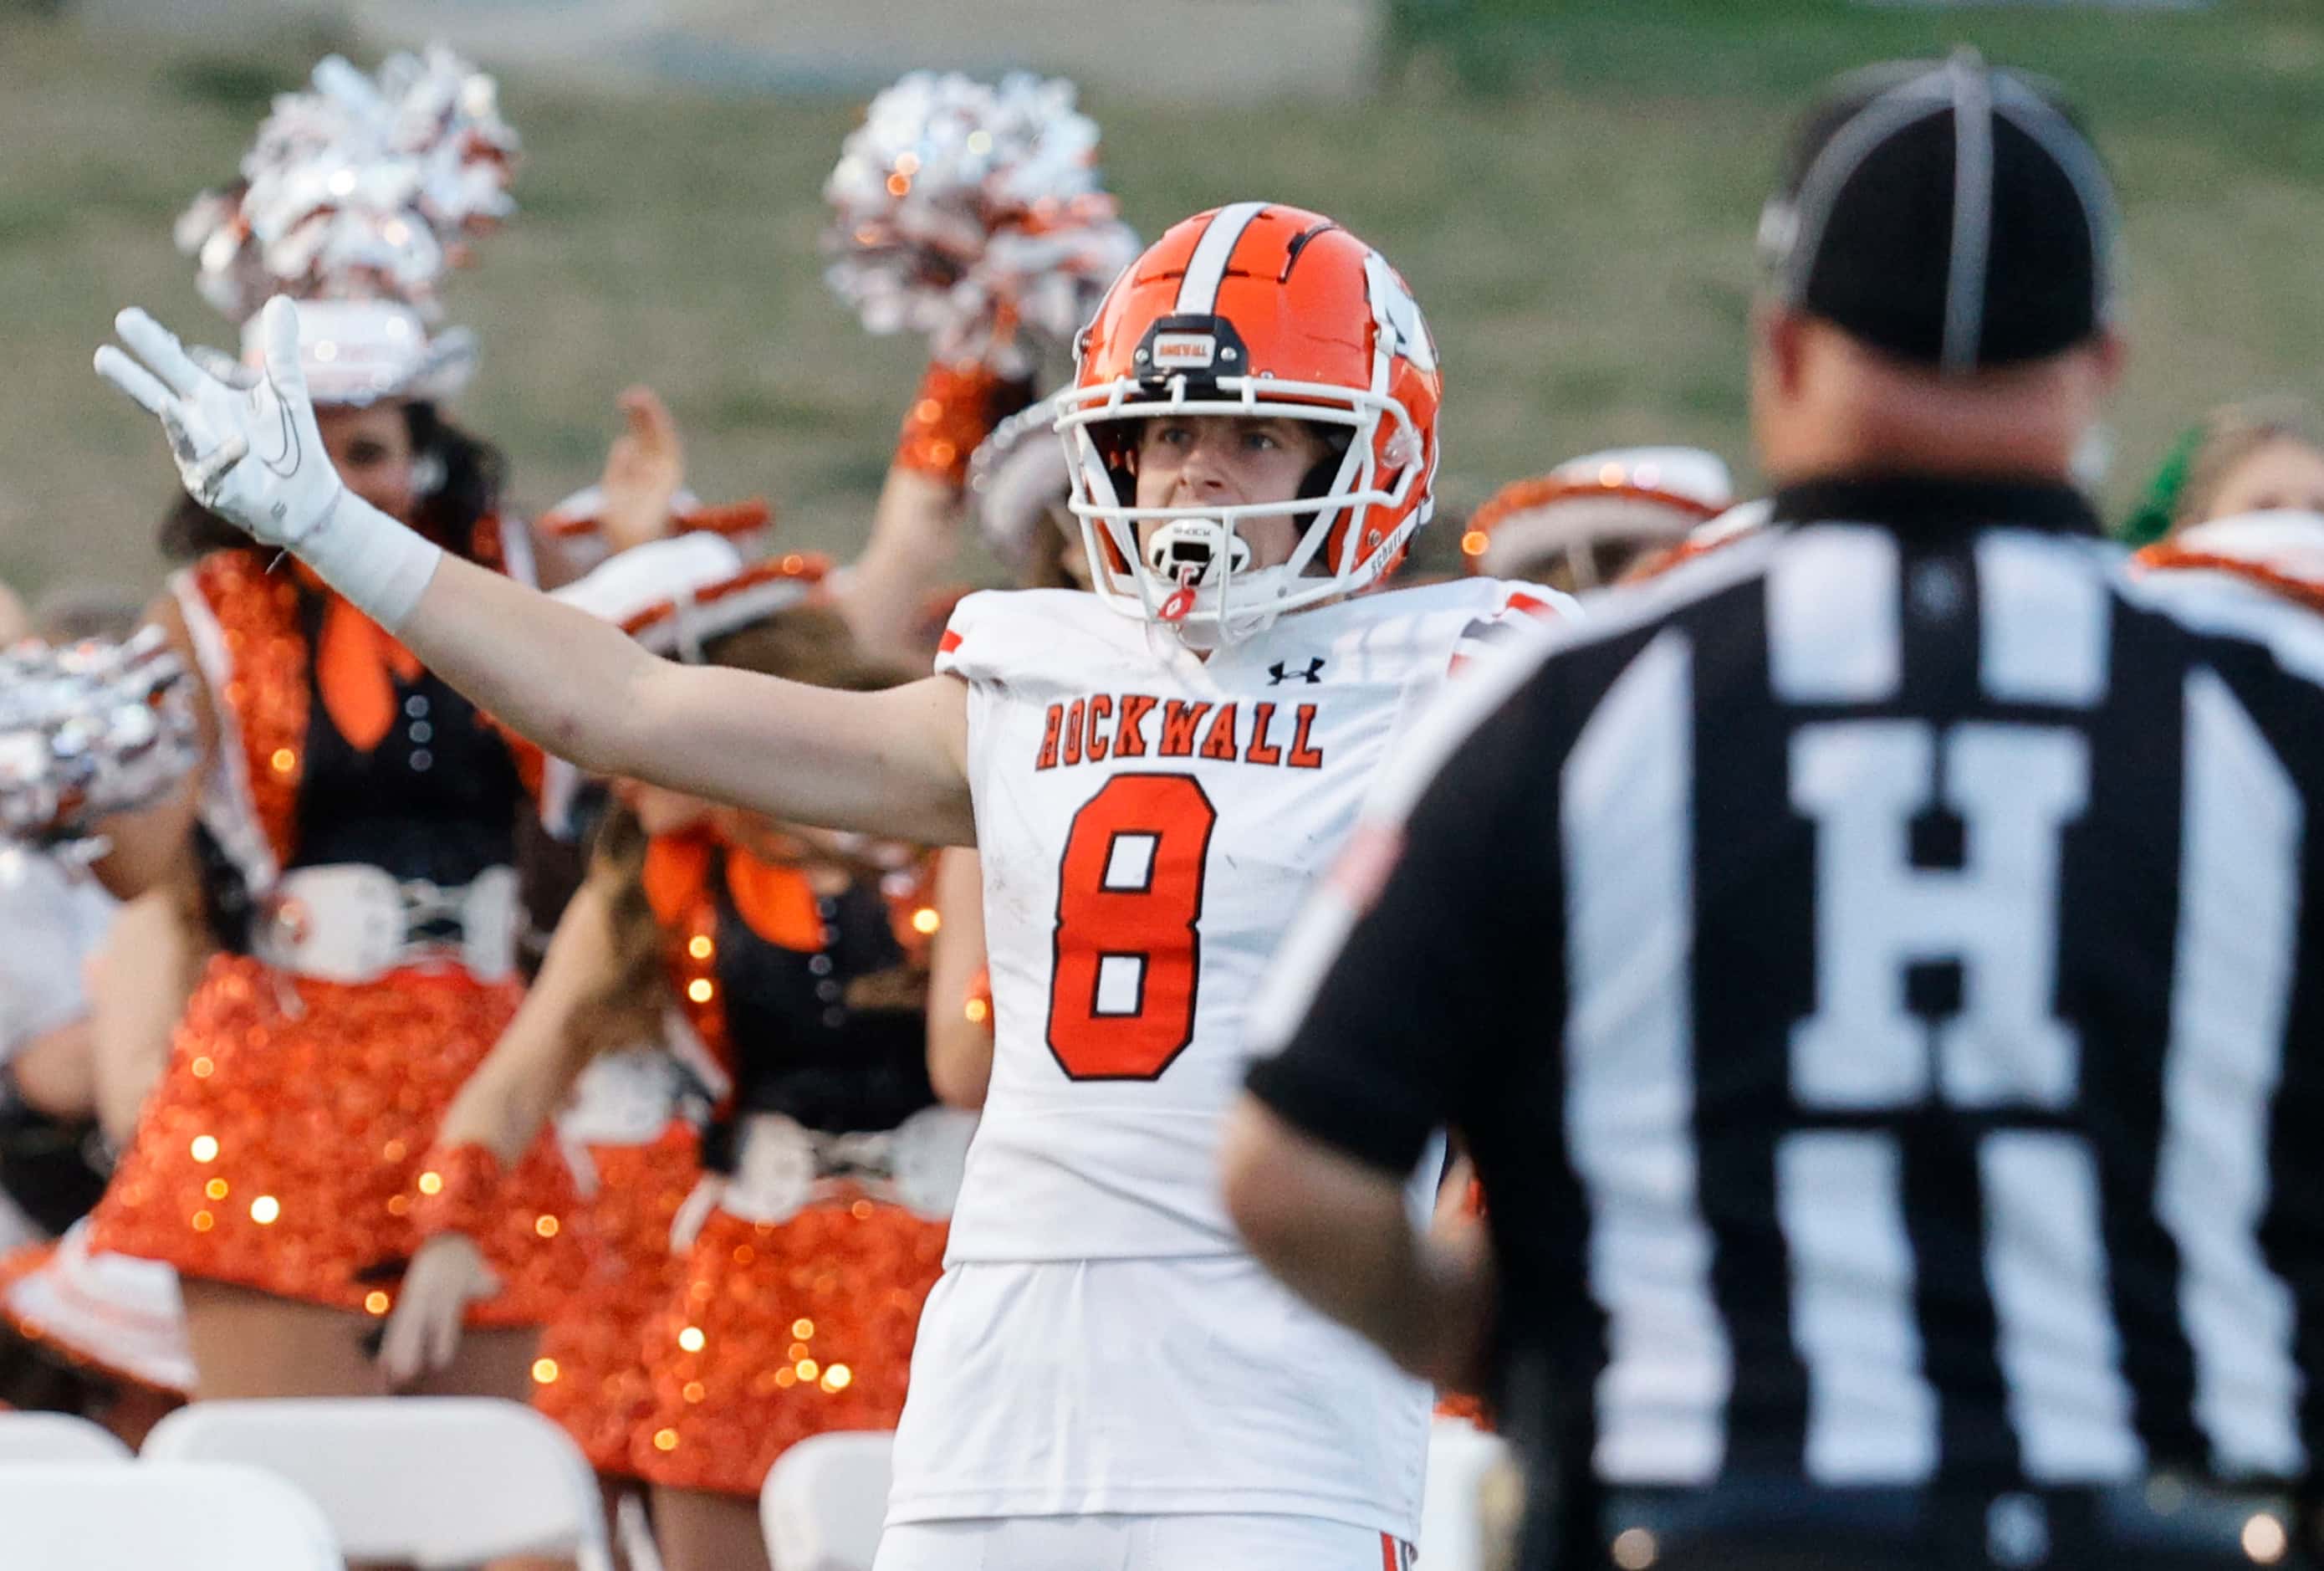 Rockwall's Tristan Gooch (8) celebrates his touchdown against Rockwall-Heath during the...